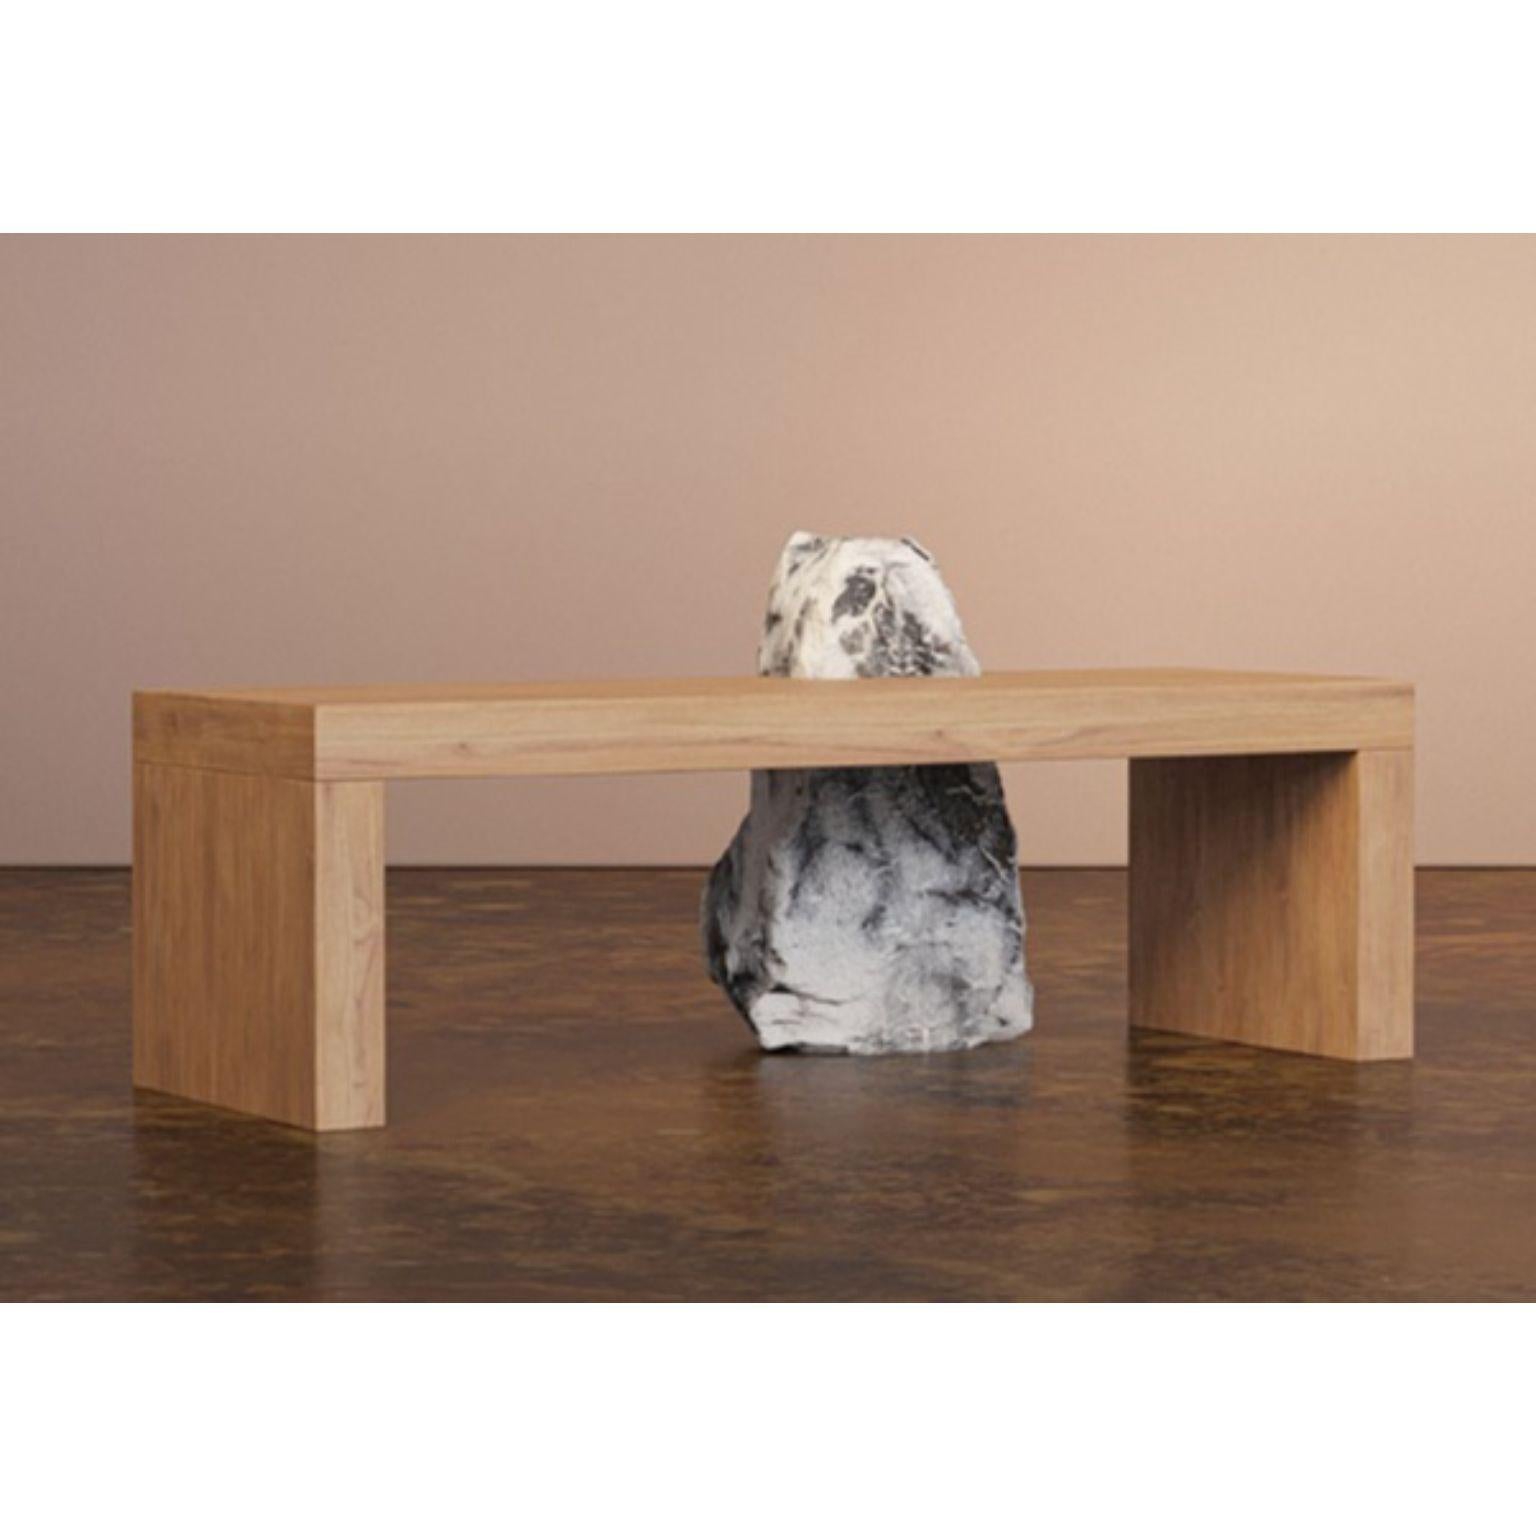 Interlove Coffee Table by Bea Interiors
One of a Kind.
Dimensions: D 49 x W 124 x H 45 cm.
Materials: Solid white oak and marble.

Interlove is a versatile piece that can serve as either a bench or a coffee table, making it a perfect addition to